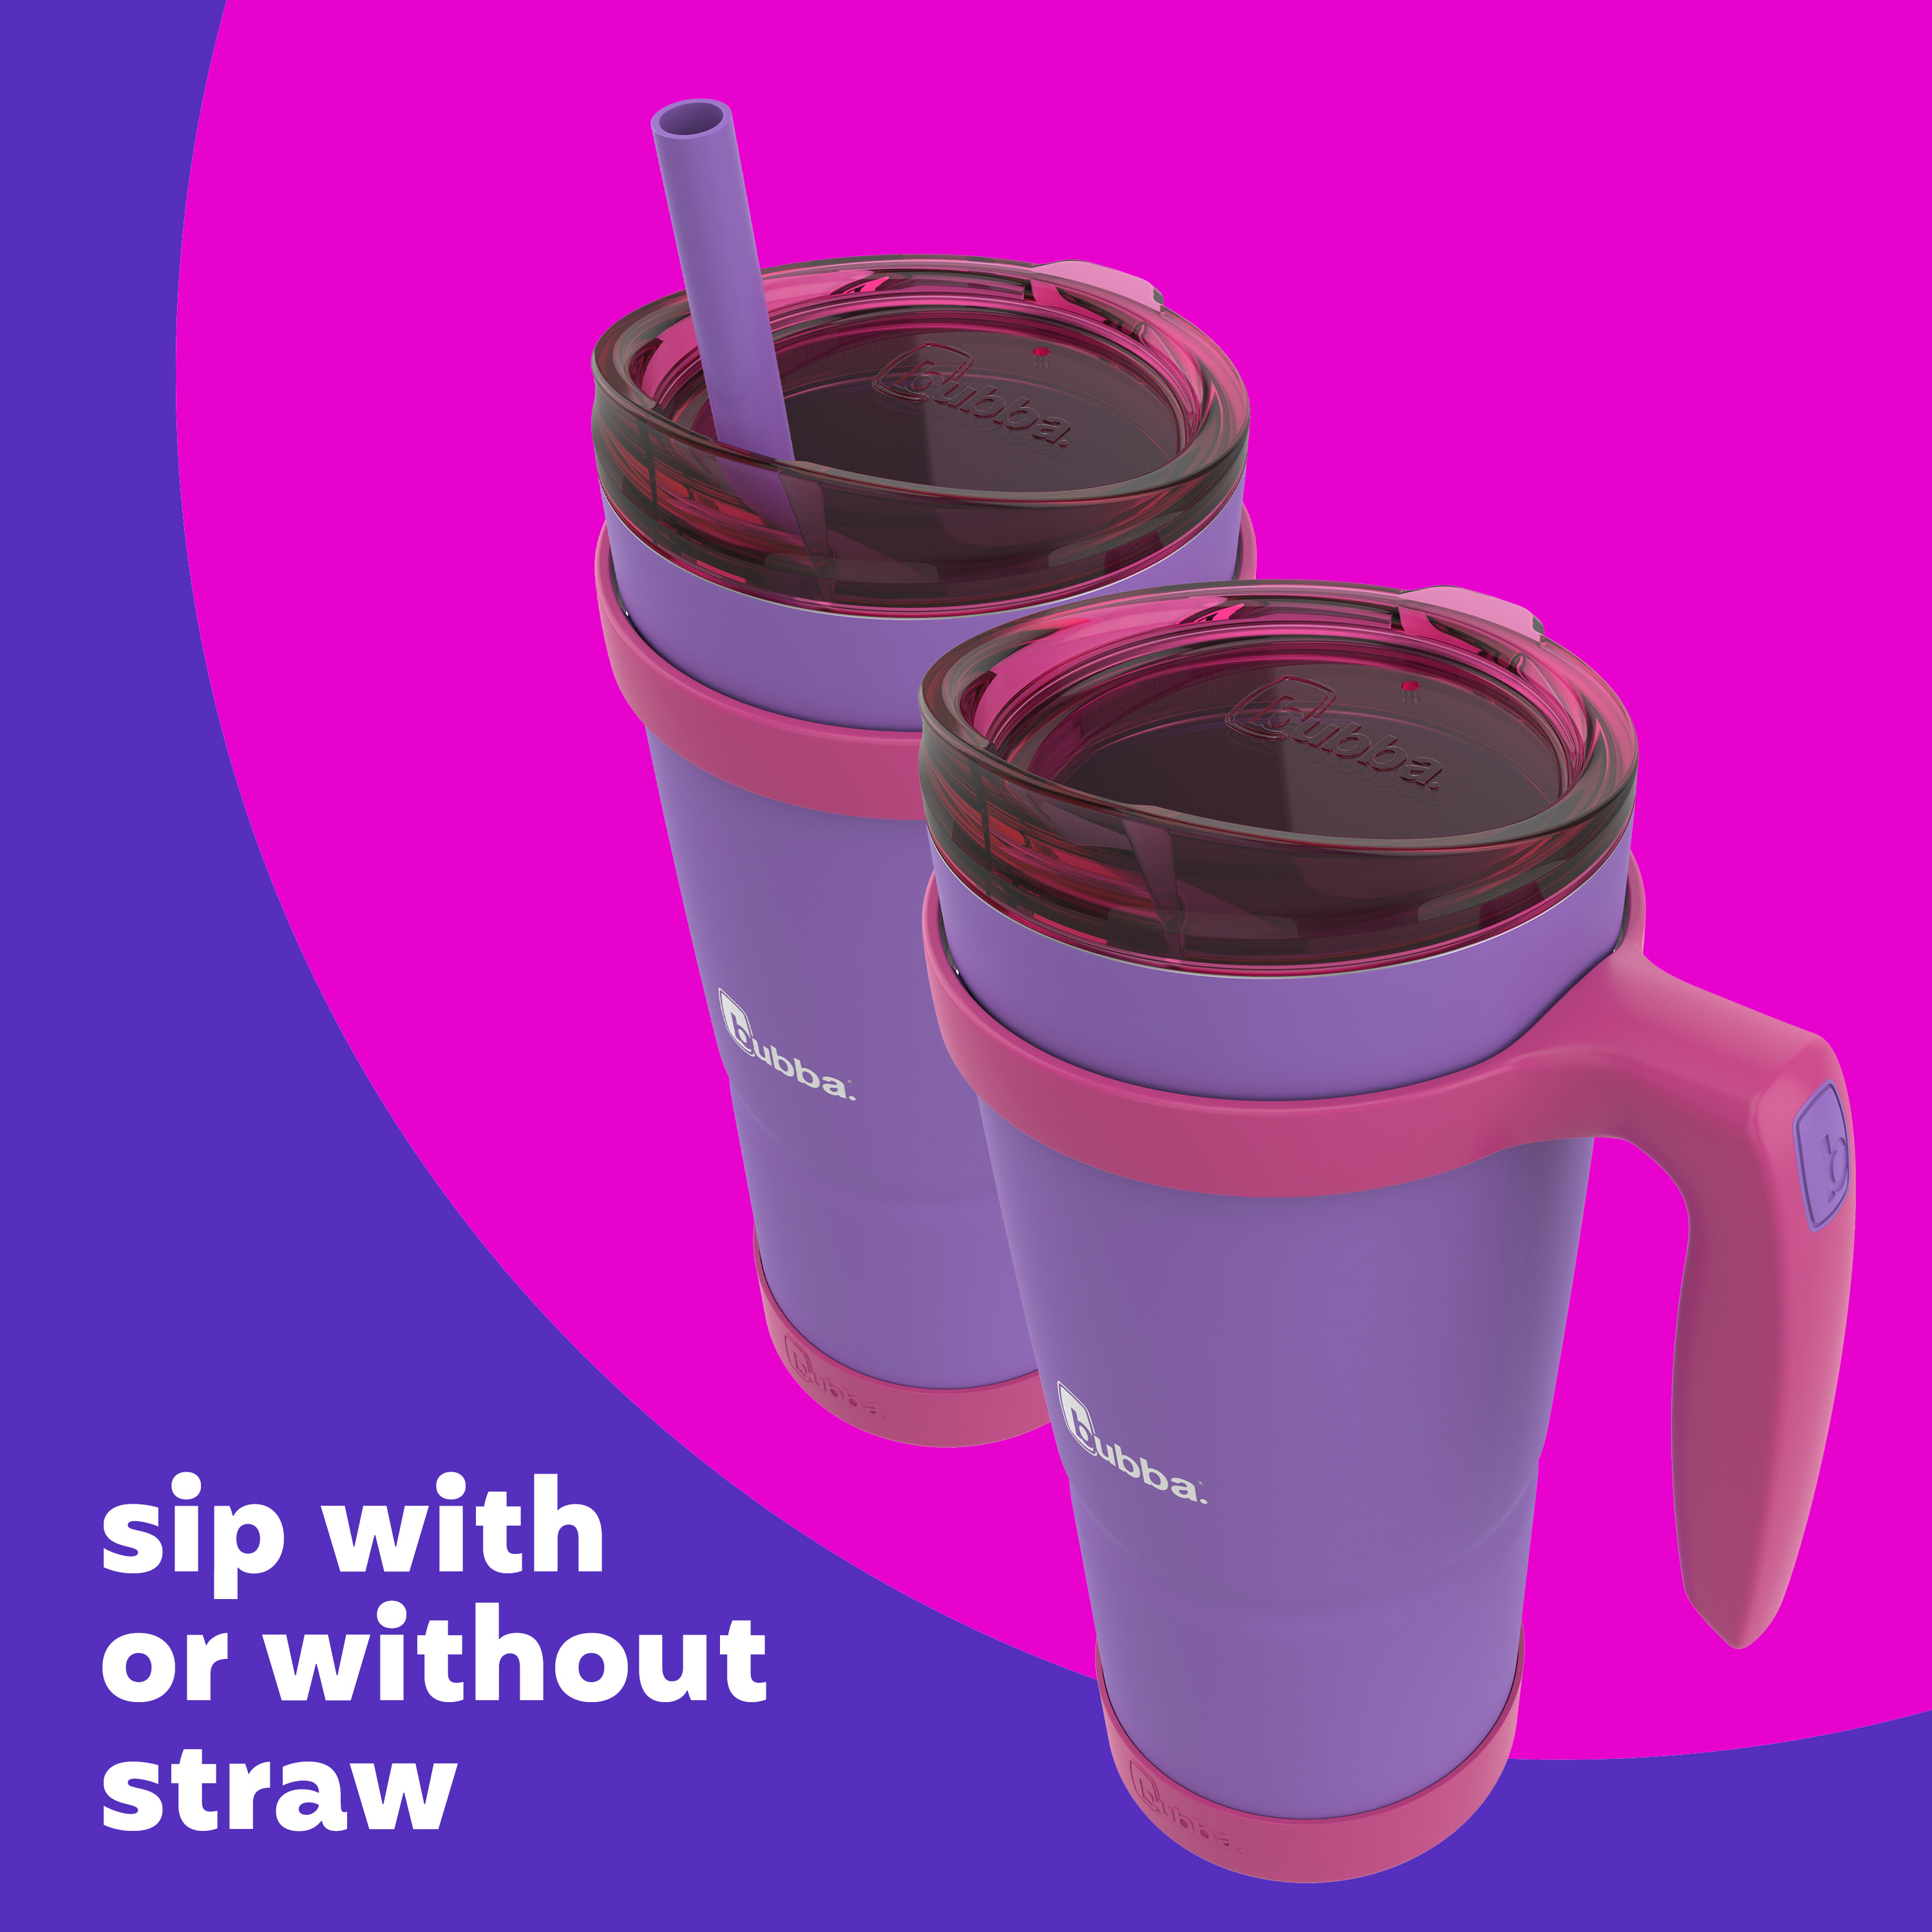 bubba Envy Stainless Steel Tumbler with Removeable Handle, Bumper, Straw Rubberized in Purple 32 oz. - image 3 of 6